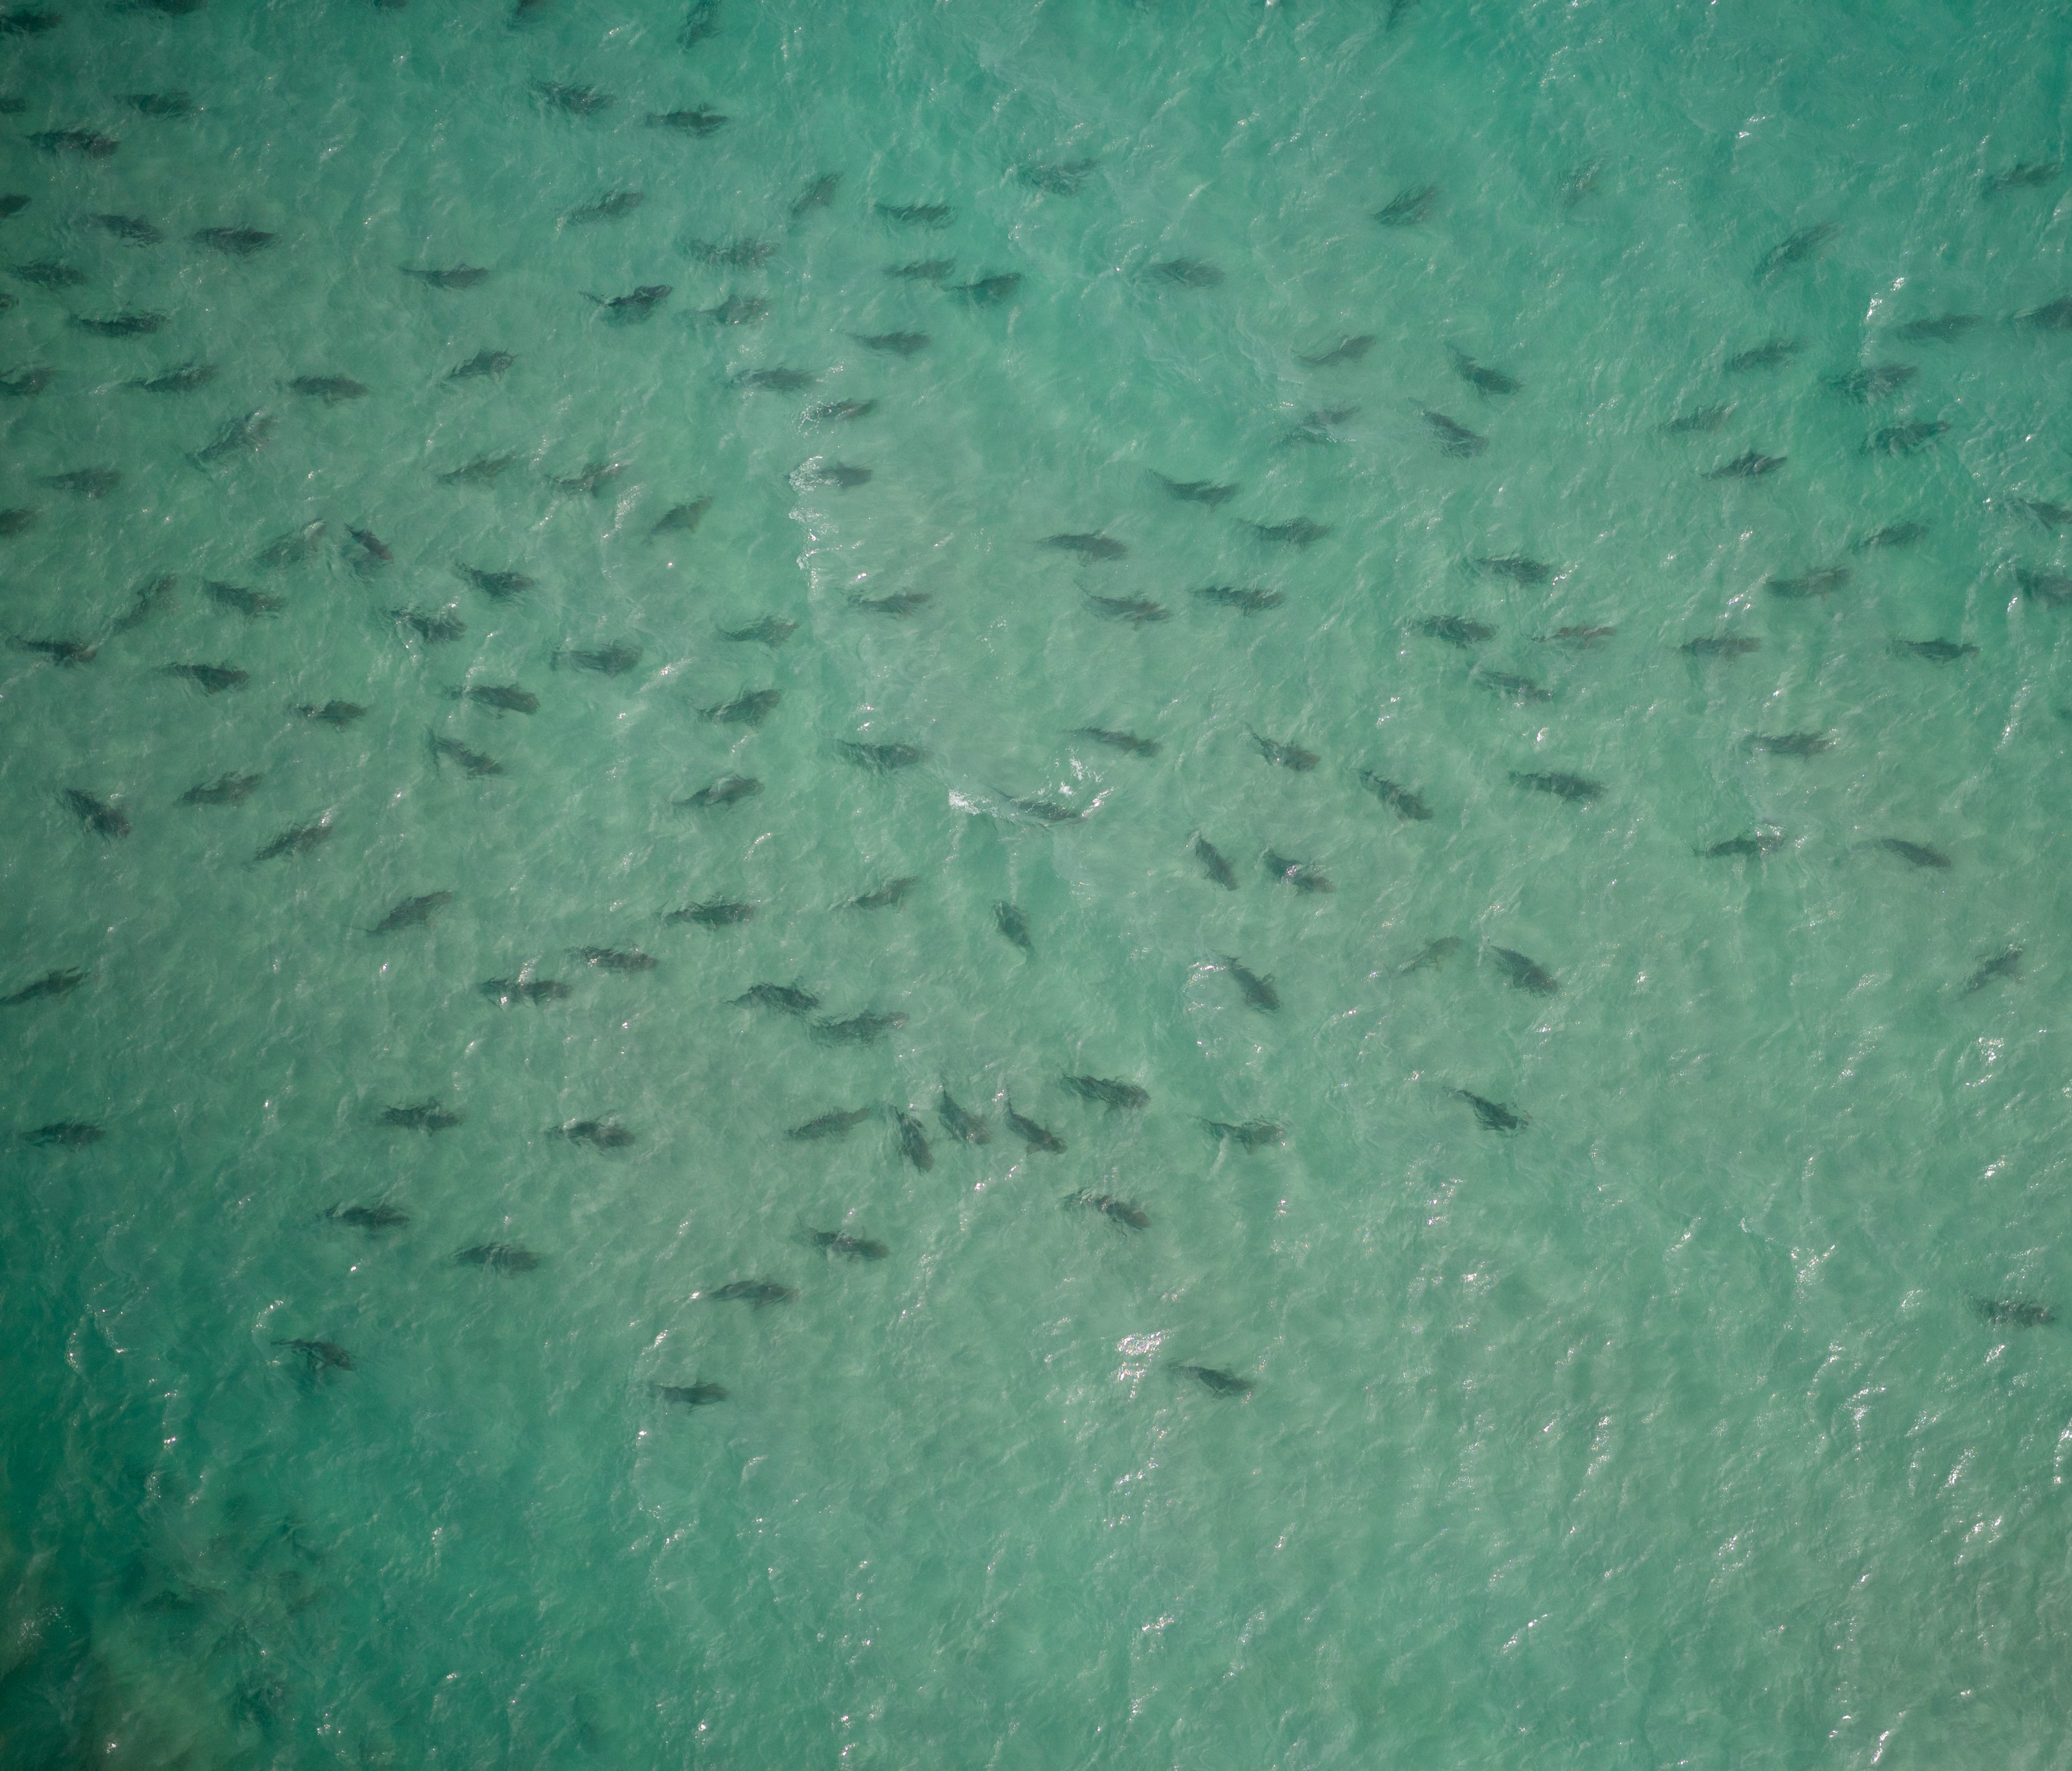 Sharks by the score can be seen enjoying their winter visit to the waters off Palm Beach County in this aerial photo provided by Florida Atlantic University's shark research lab in March 2016.